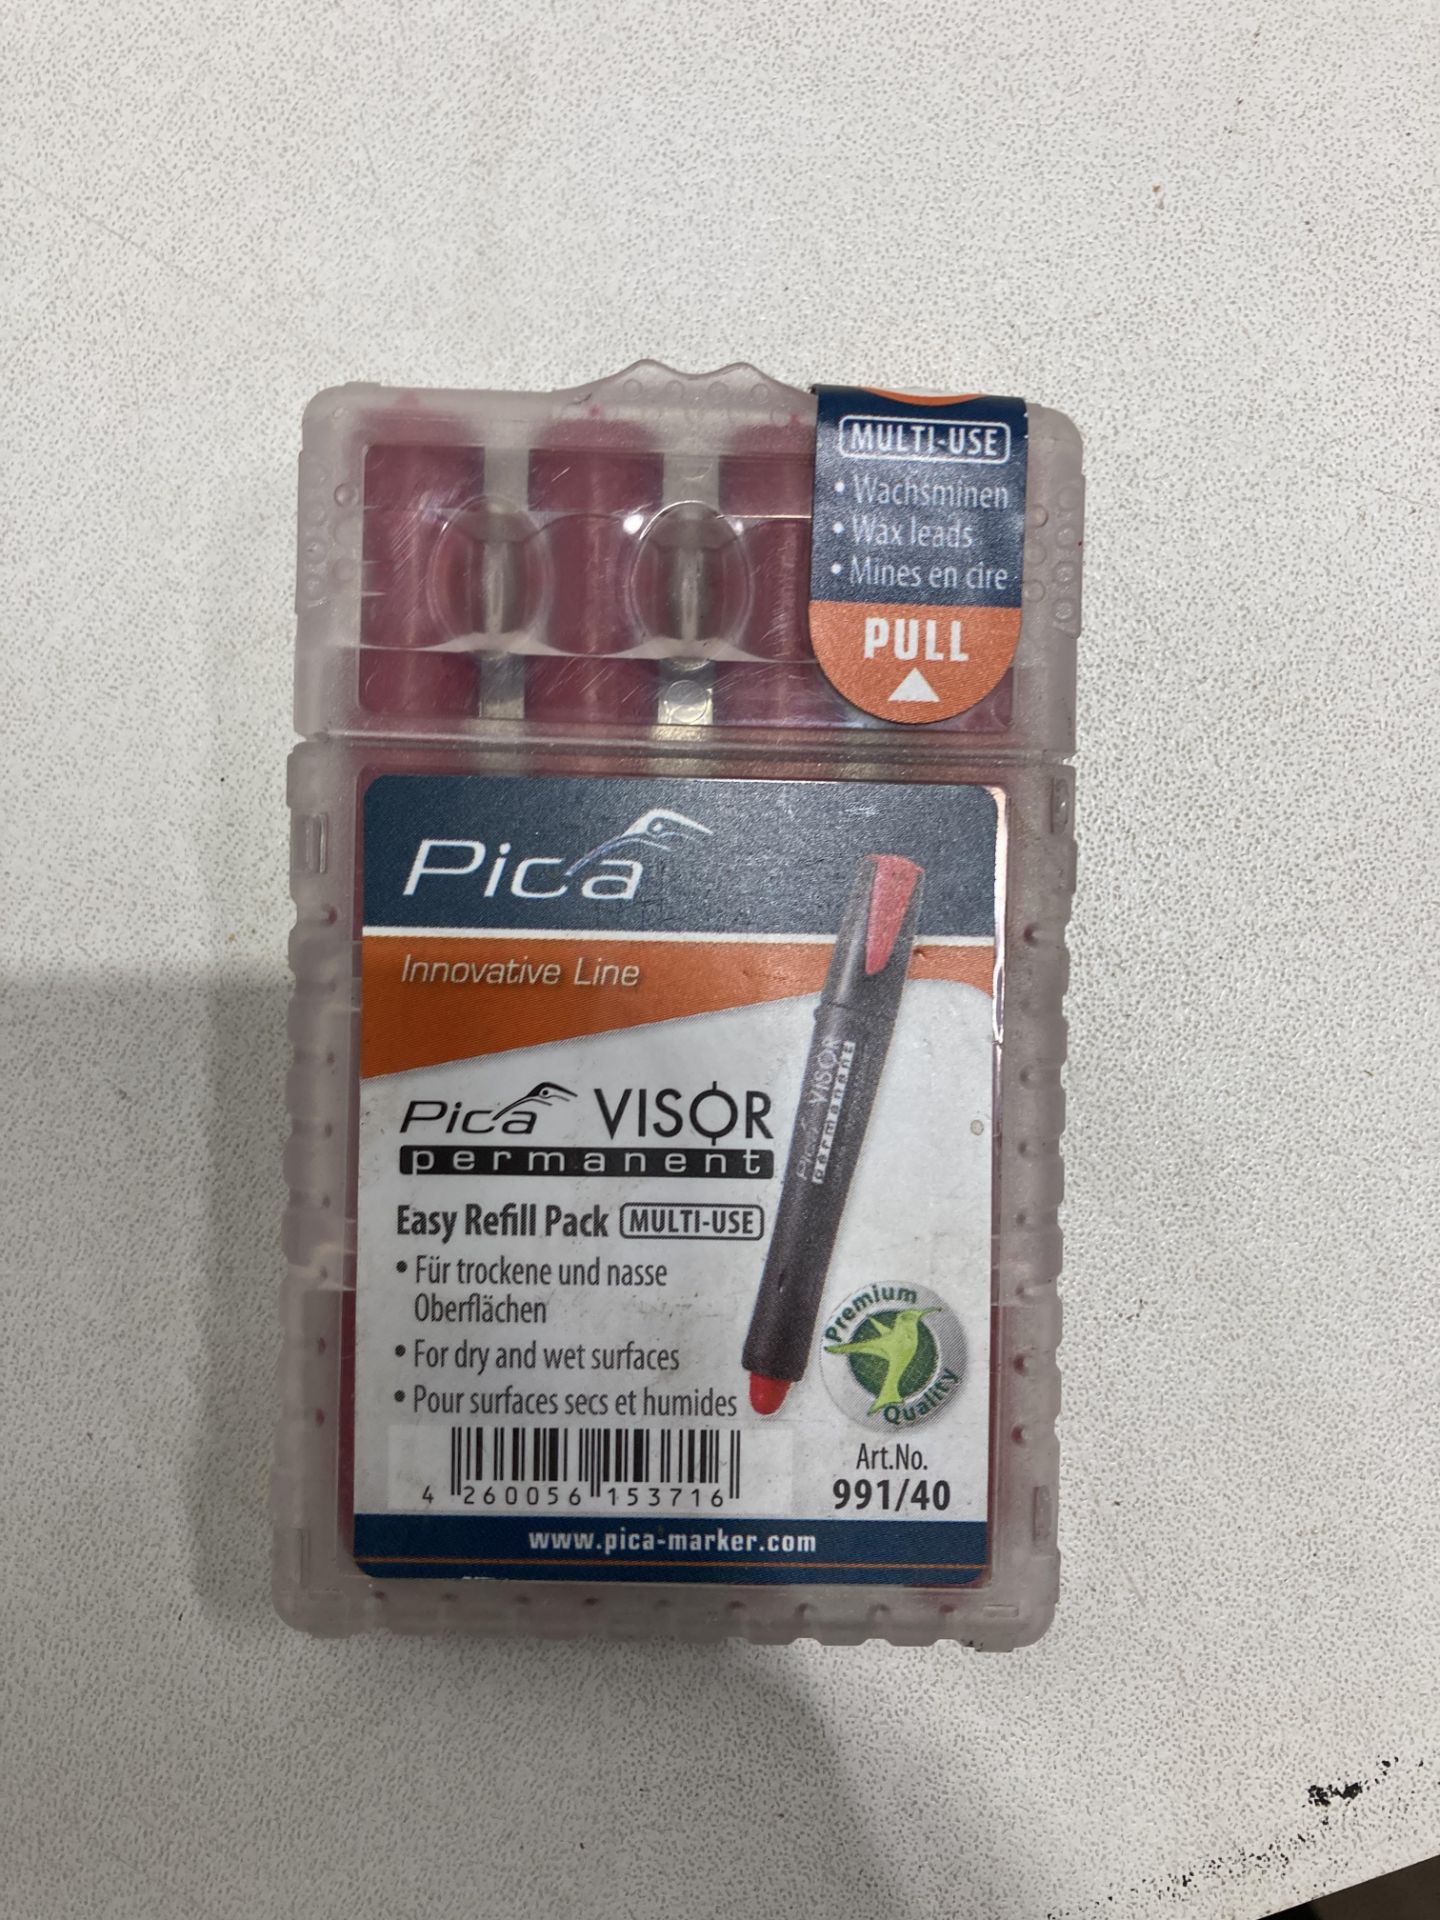 Pica-Dry Refill Leads & Markers - Image 10 of 11